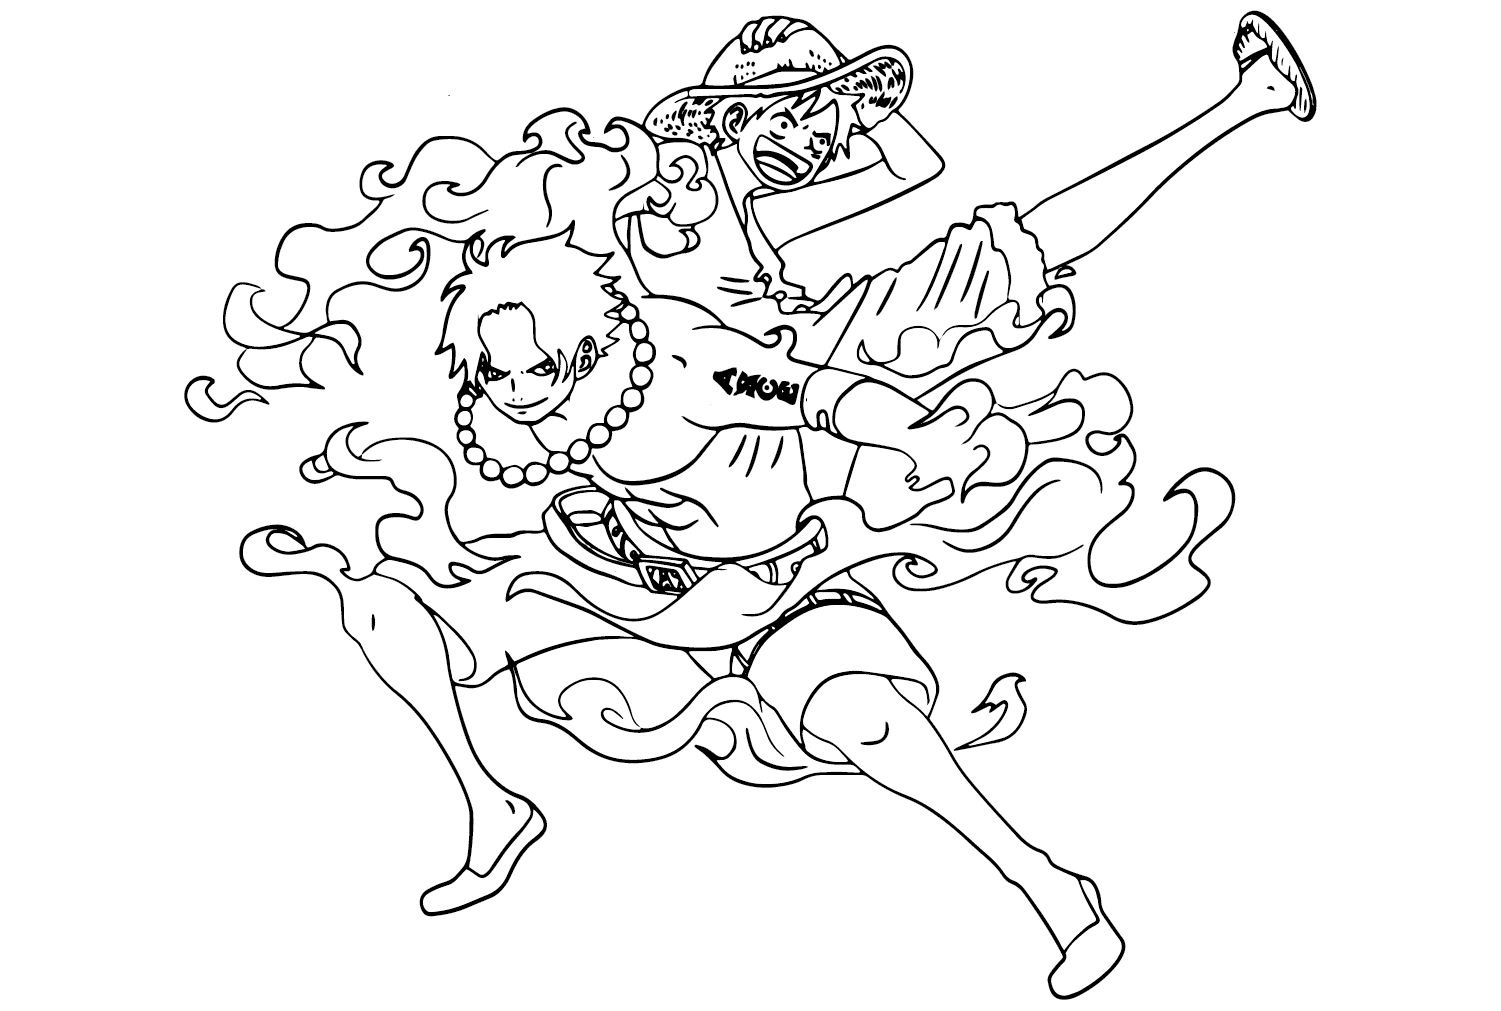 Ace and Luffy Coloring Page Free from Portgas D. Ace